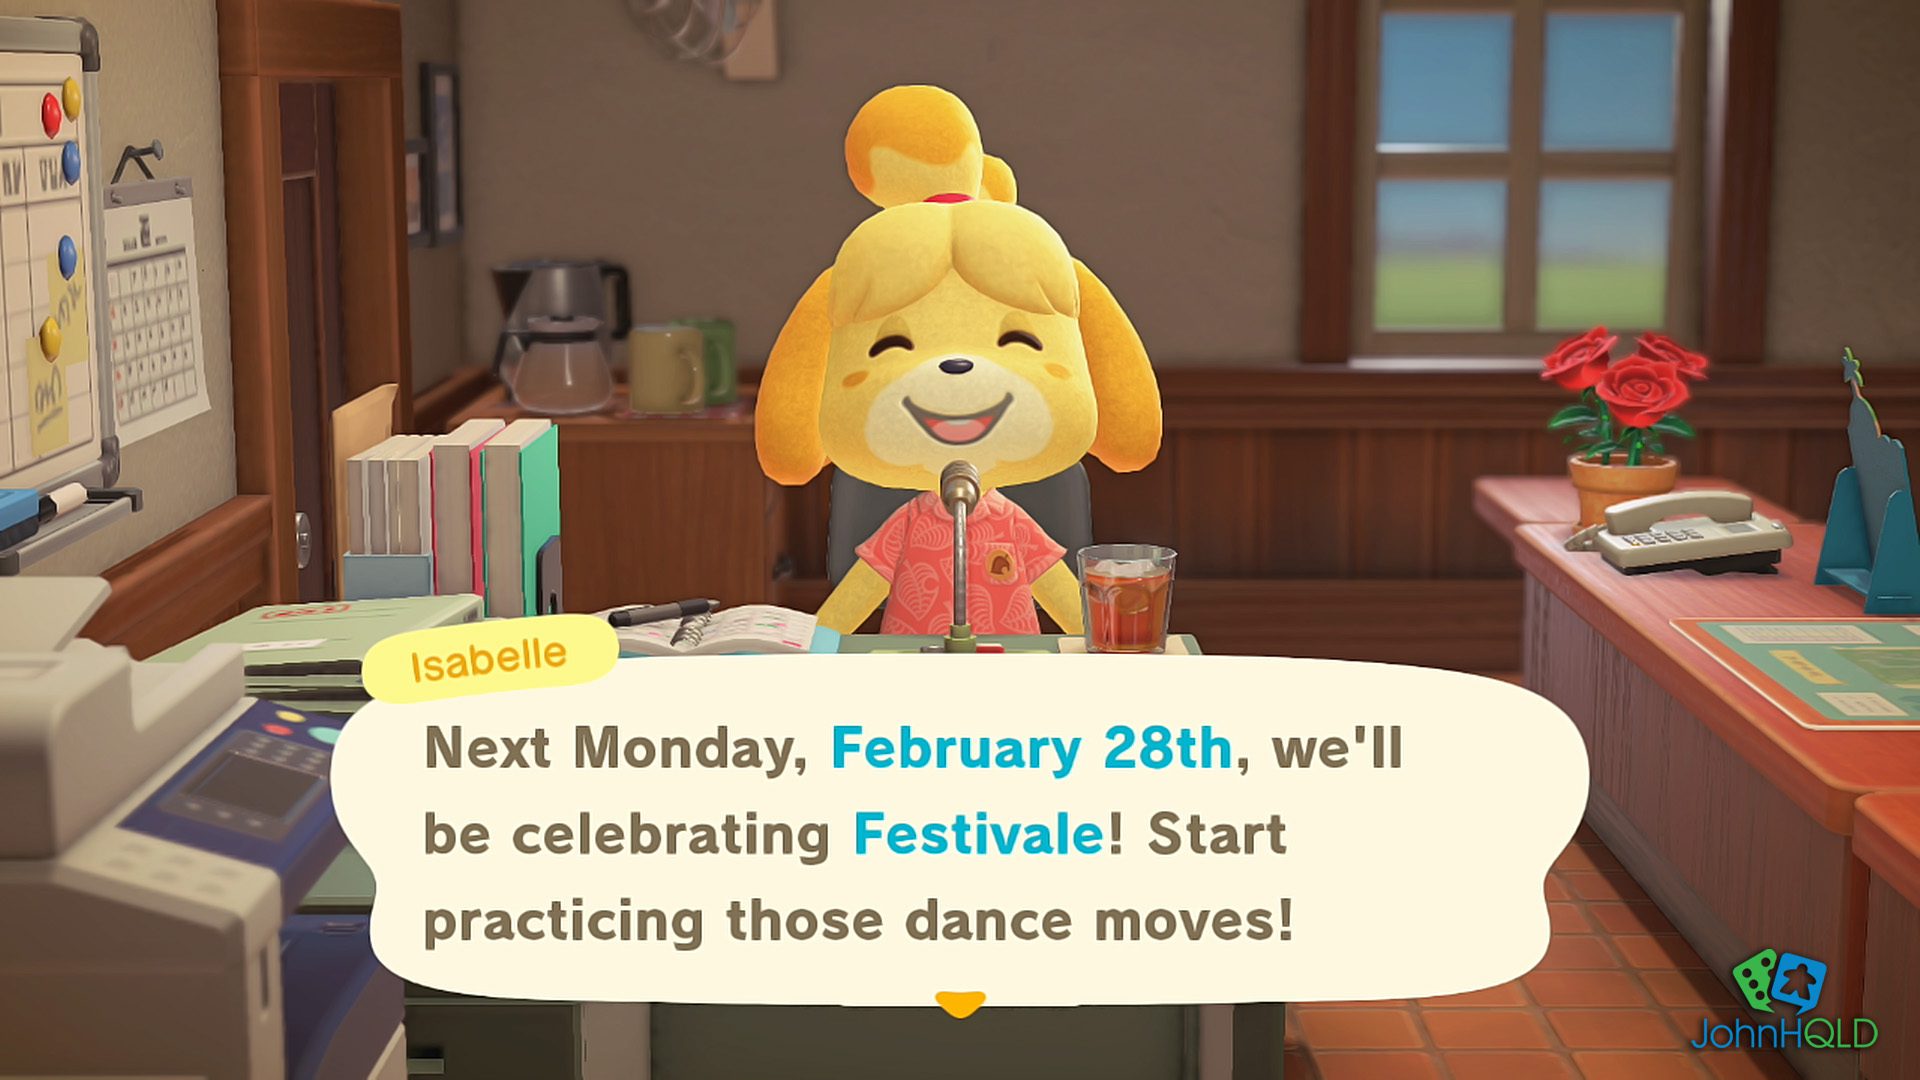 20220228 Animal Crossing New Horizons 2022022308284822 - Do I want to join the Festivale